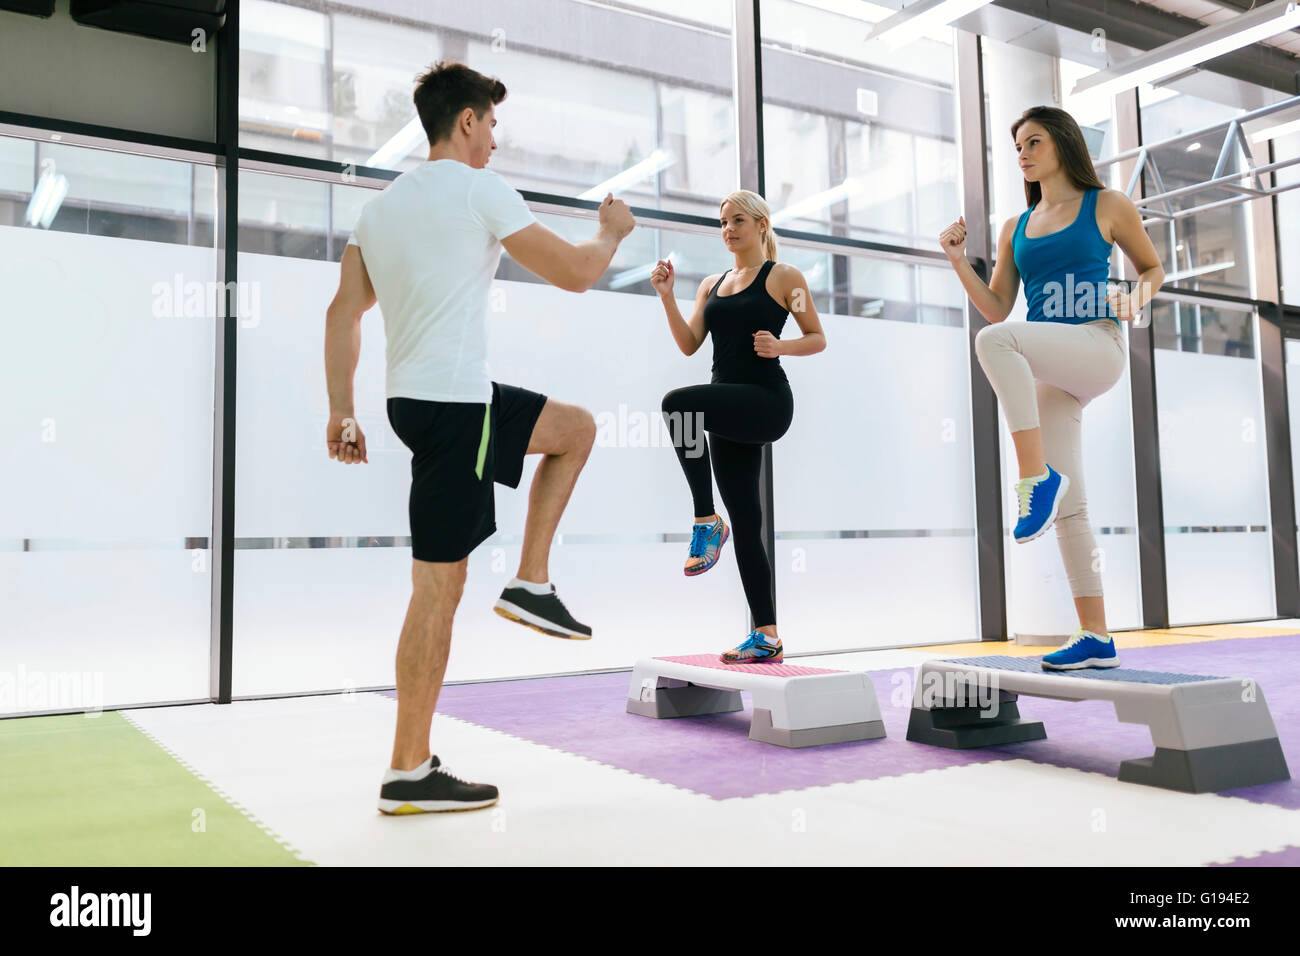 Personal trainer exercising with aerobics trainees in fitness club Stock Photo